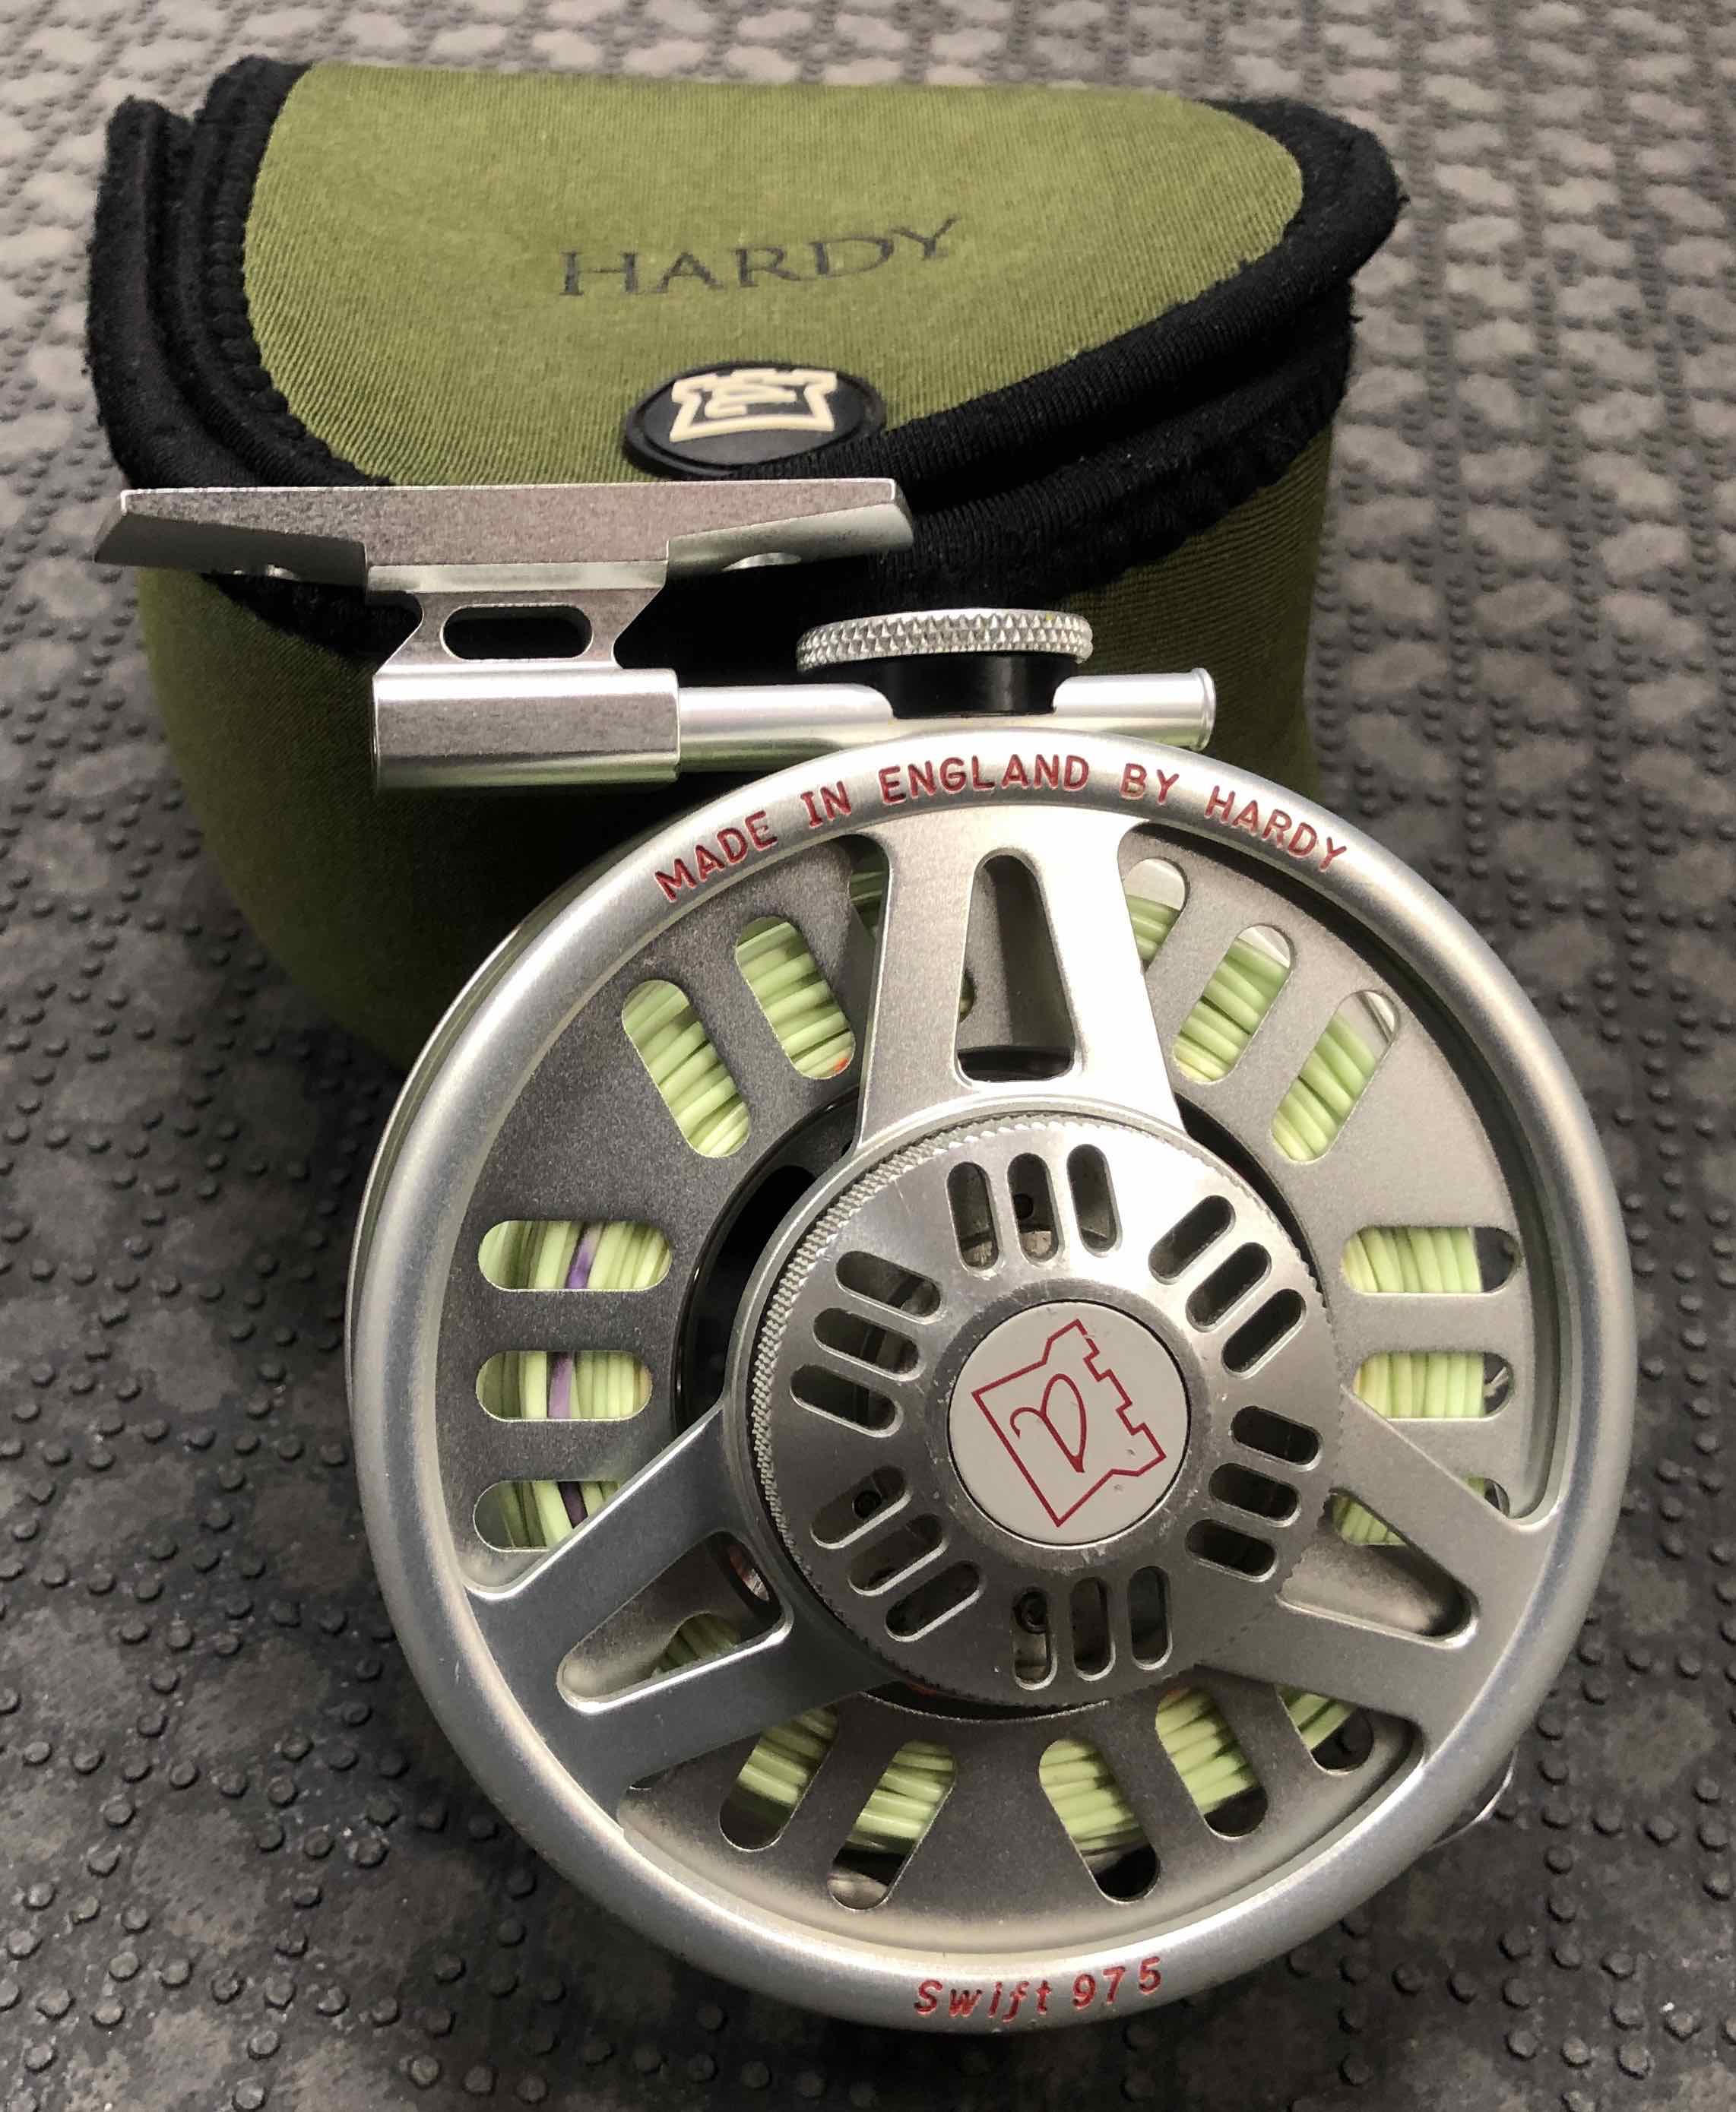 NEW PRICE - Hardy Limited Edition 975 SE - Swift Fly Reel - c/w WF8 Fly Line - GREAT SHAPE! - WAS $300 - NOW $250